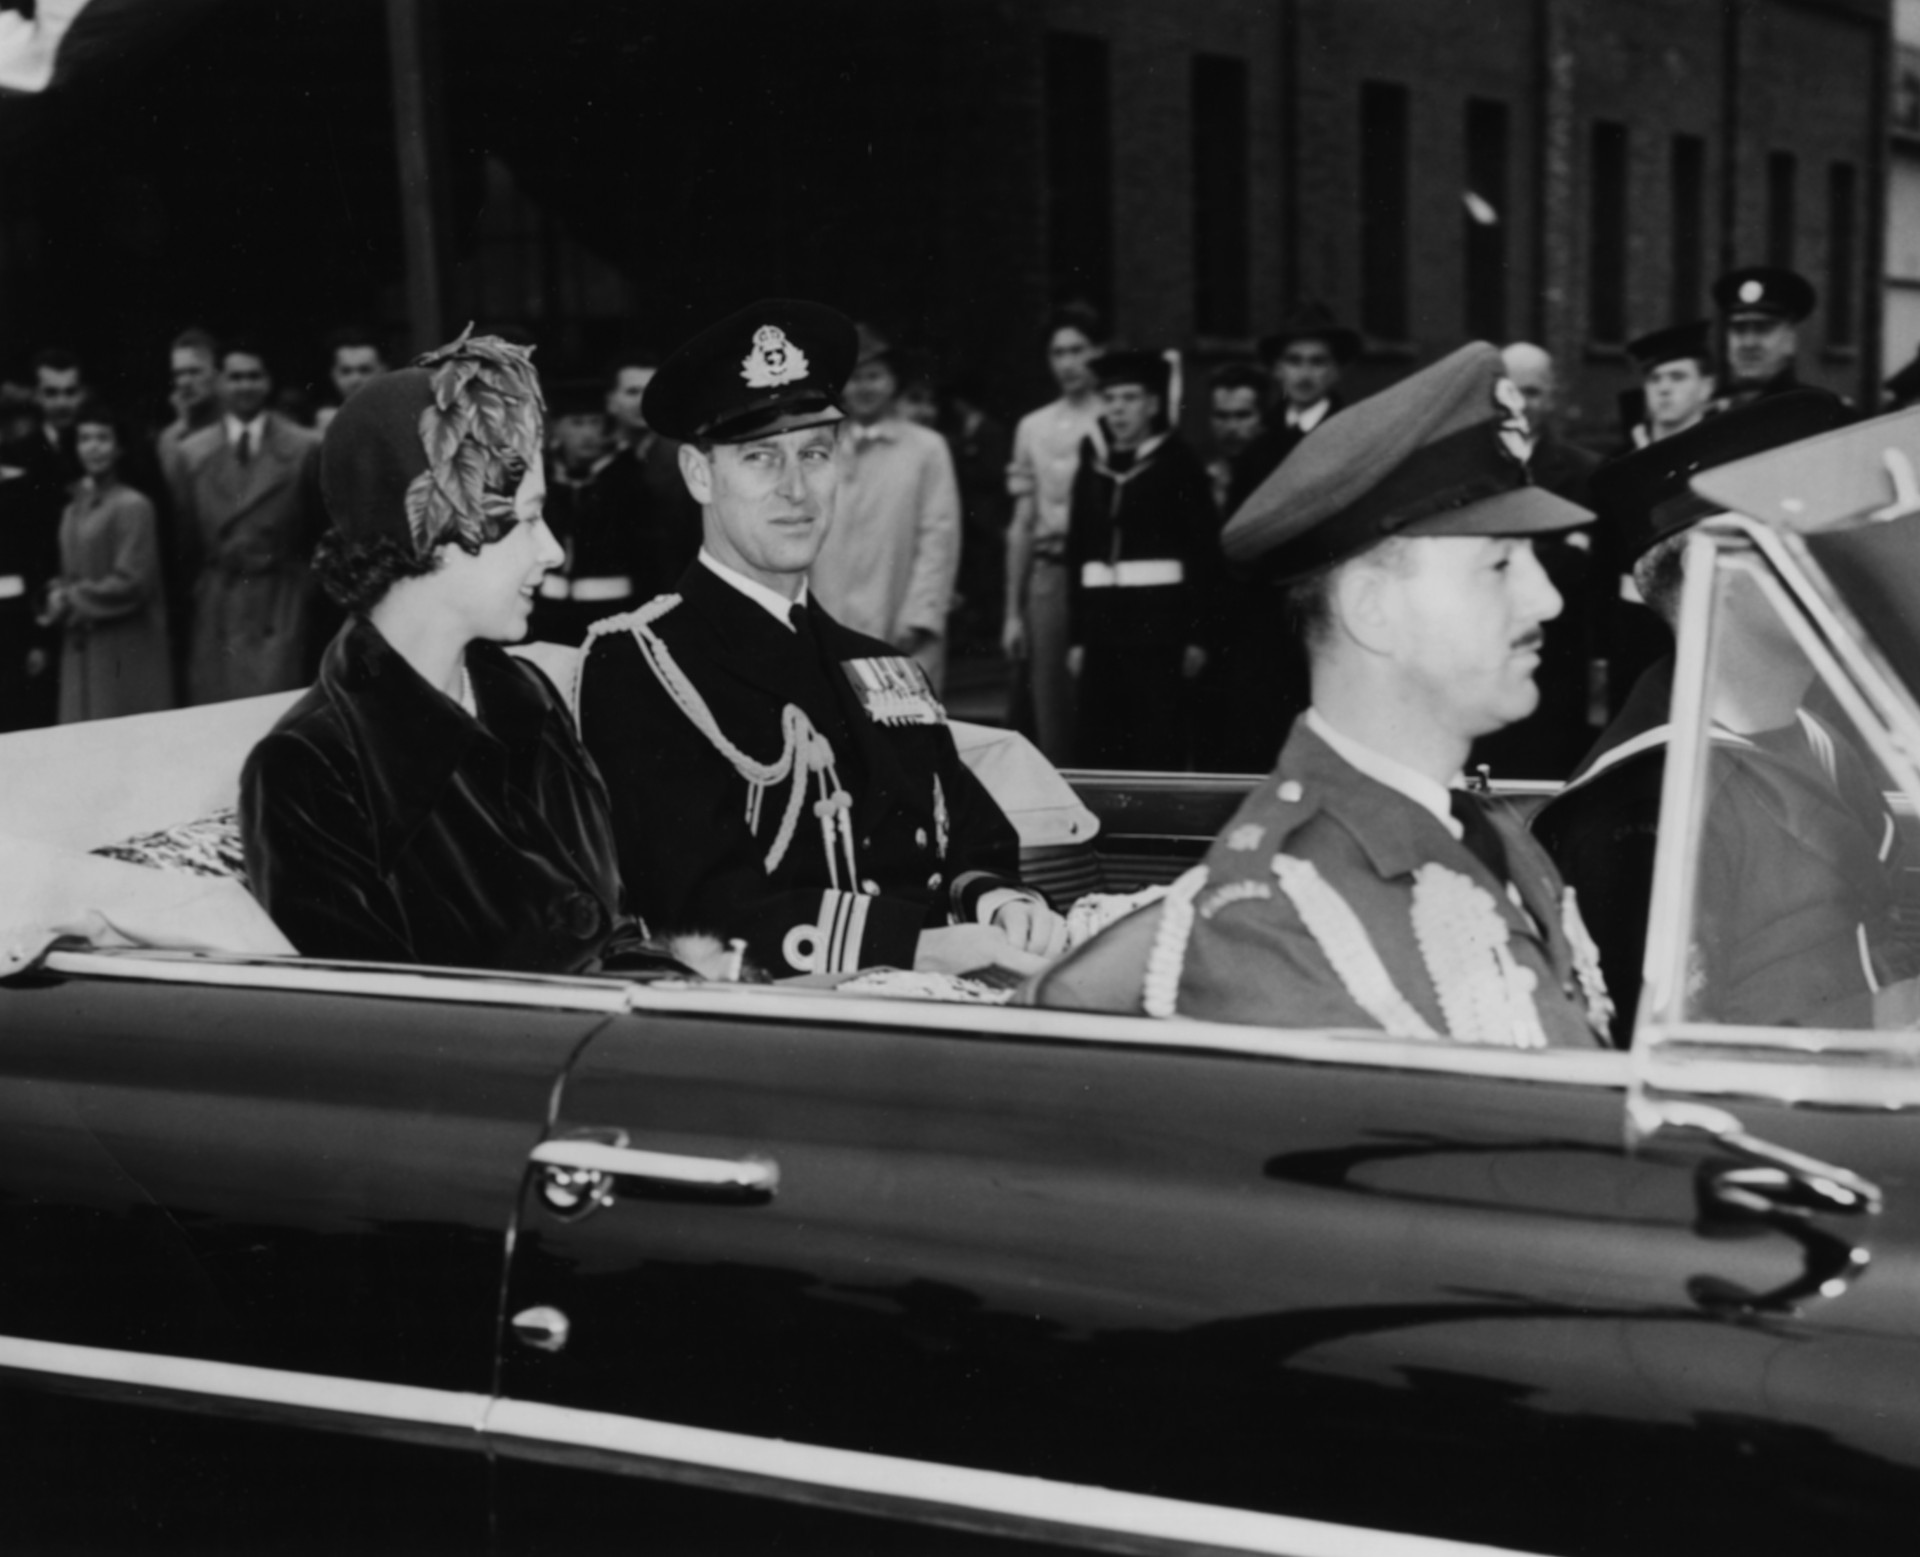 Princess Elizabeth and Prince Philip ride through crowded streets in Quebec.<p><a href="https://www.msn.com/en-za/community/channel/vid-7xx8mnucu55yw63we9va2gwr7uihbxwc68fxqp25x6tg4ftibpra?cvid=94631541bc0f4f89bfd59158d696ad7e">Follow us and access great exclusive content every day</a></p>